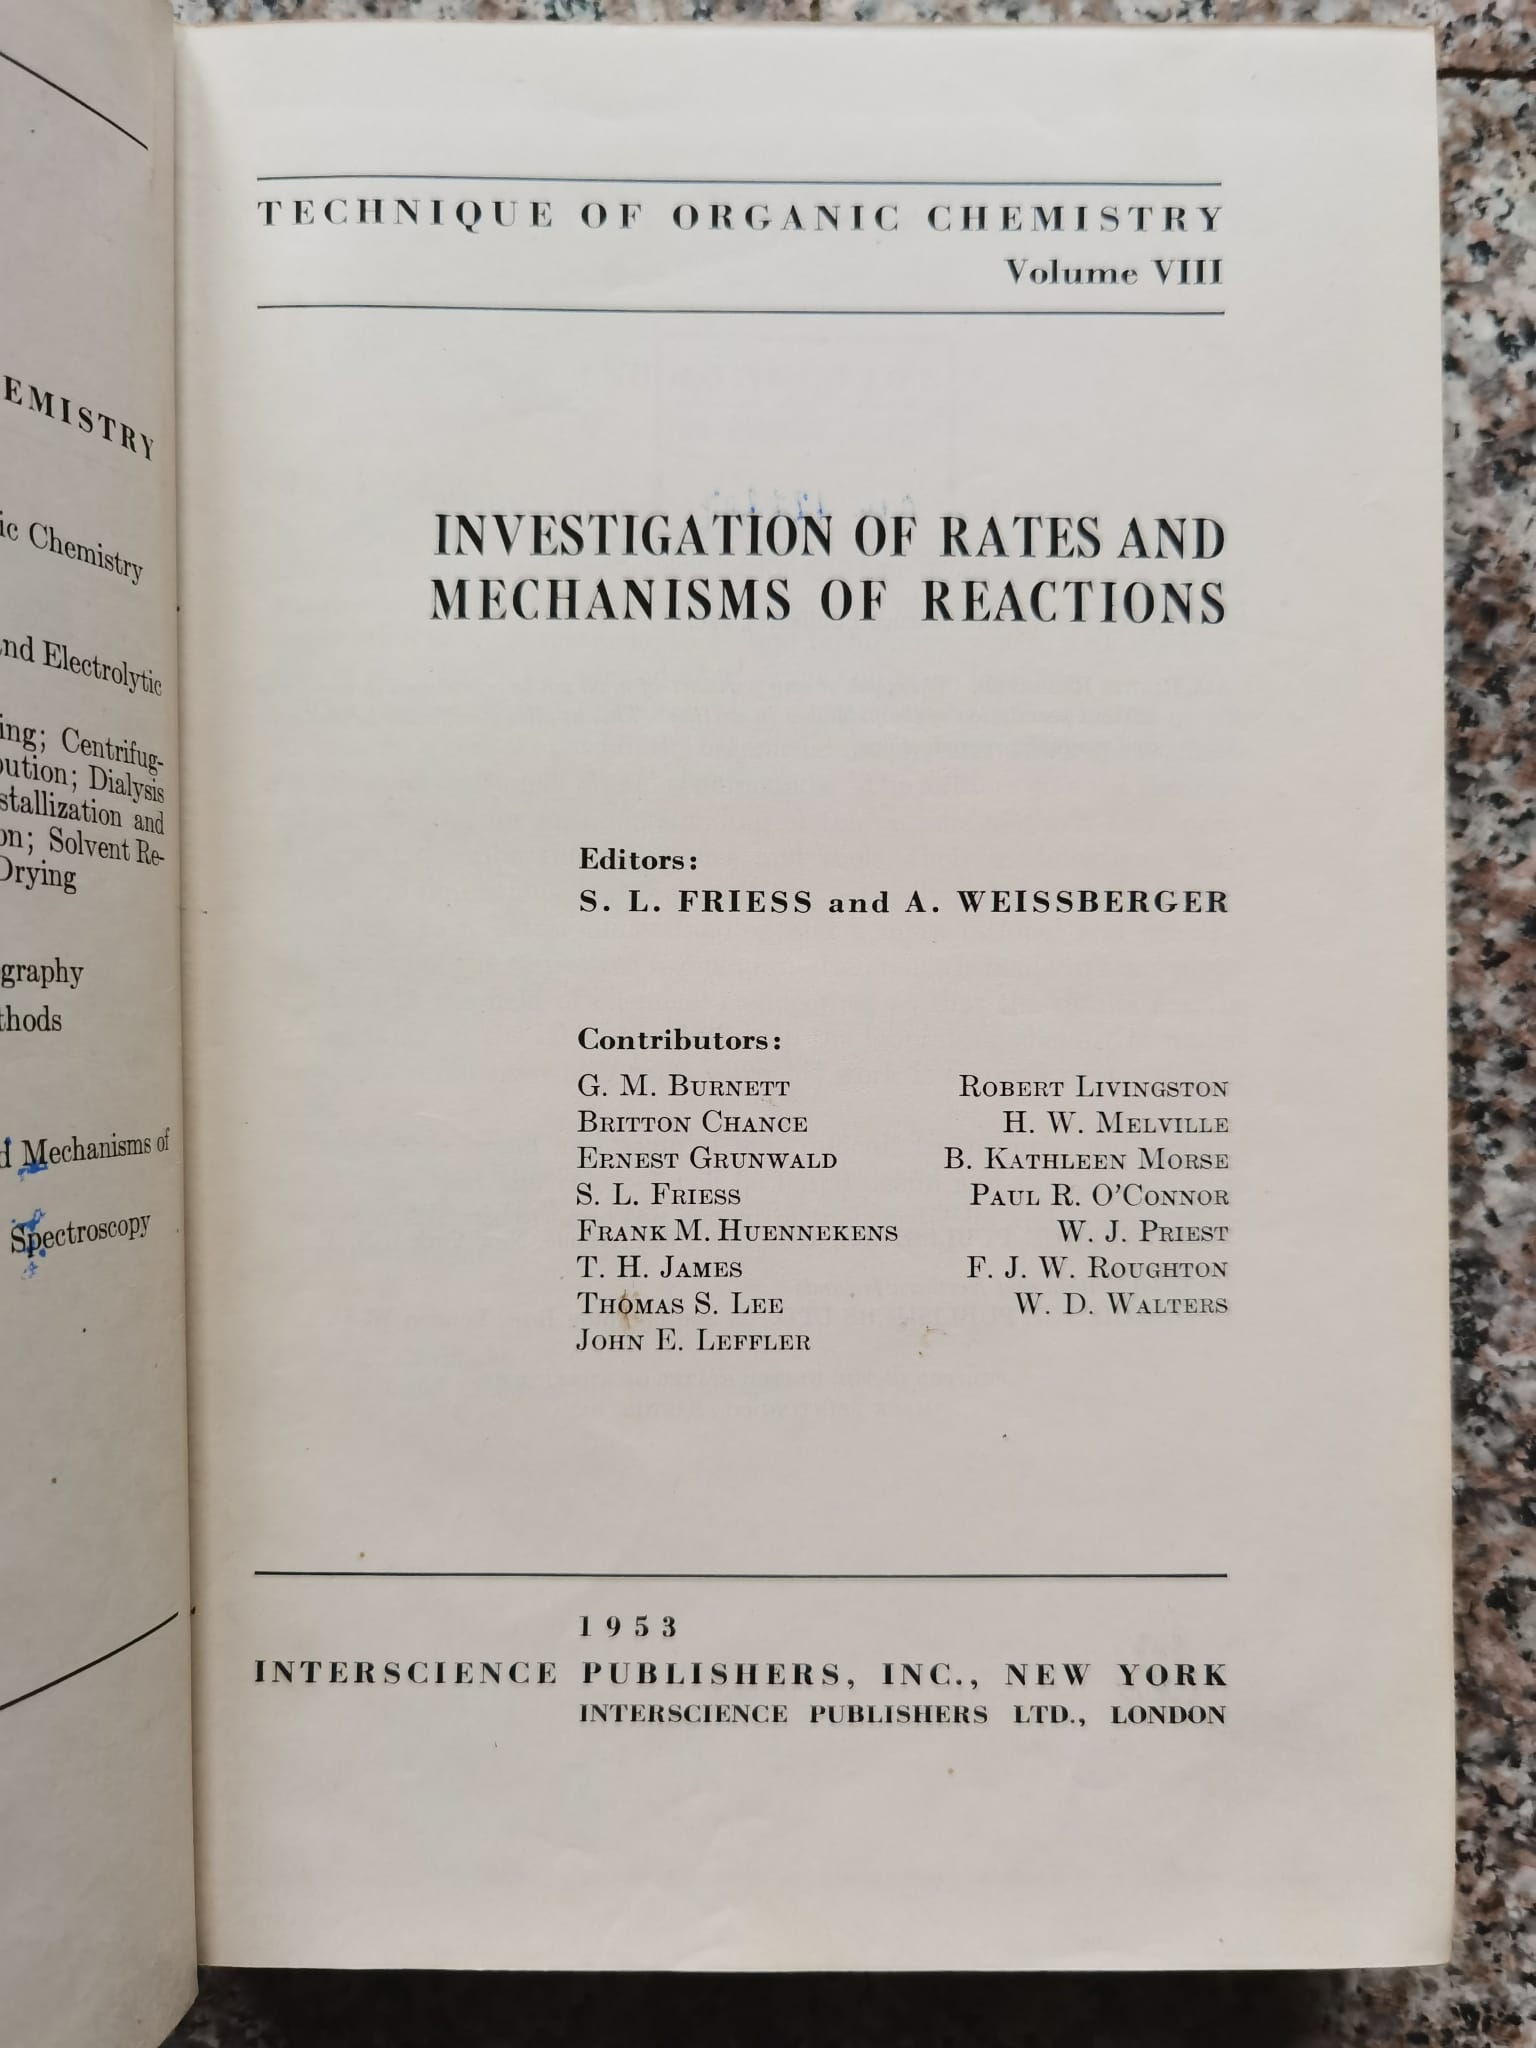 investigation on rates and mechanisms of reaction                                                    s.i. friess                                                                                         